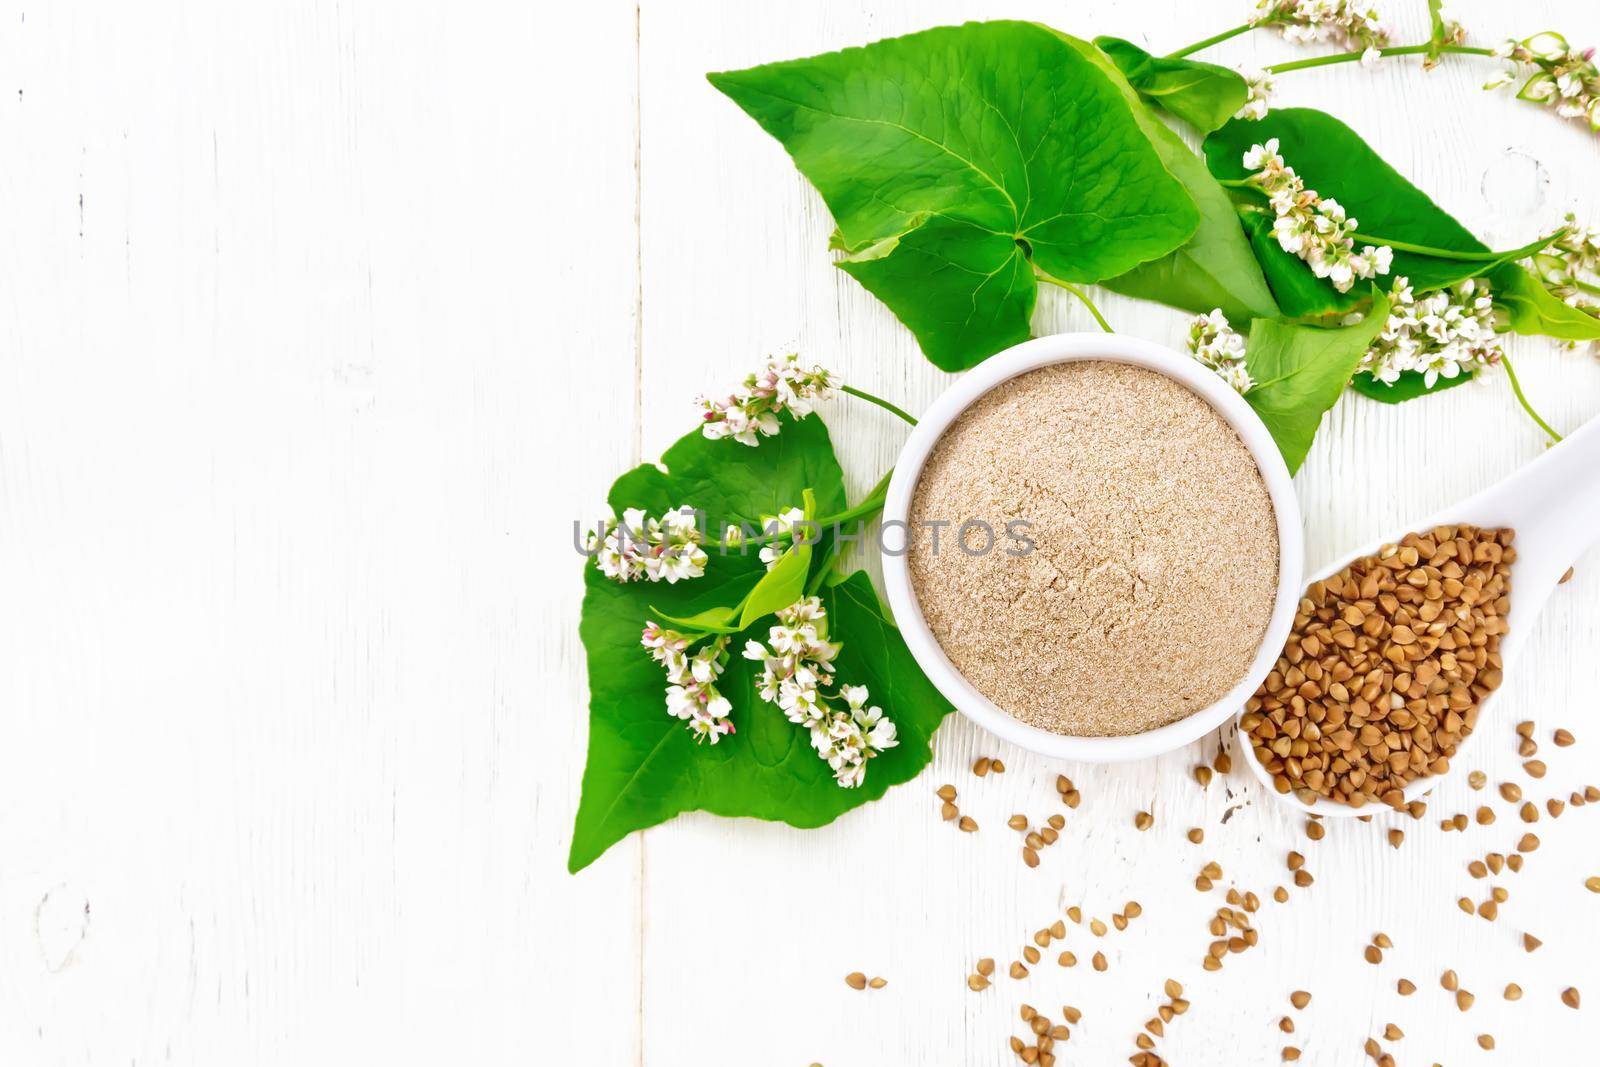 Brown buckwheat flour in a bowl, brown groats in a spoon, flowers and buckwheat leaves on wooden board background from above